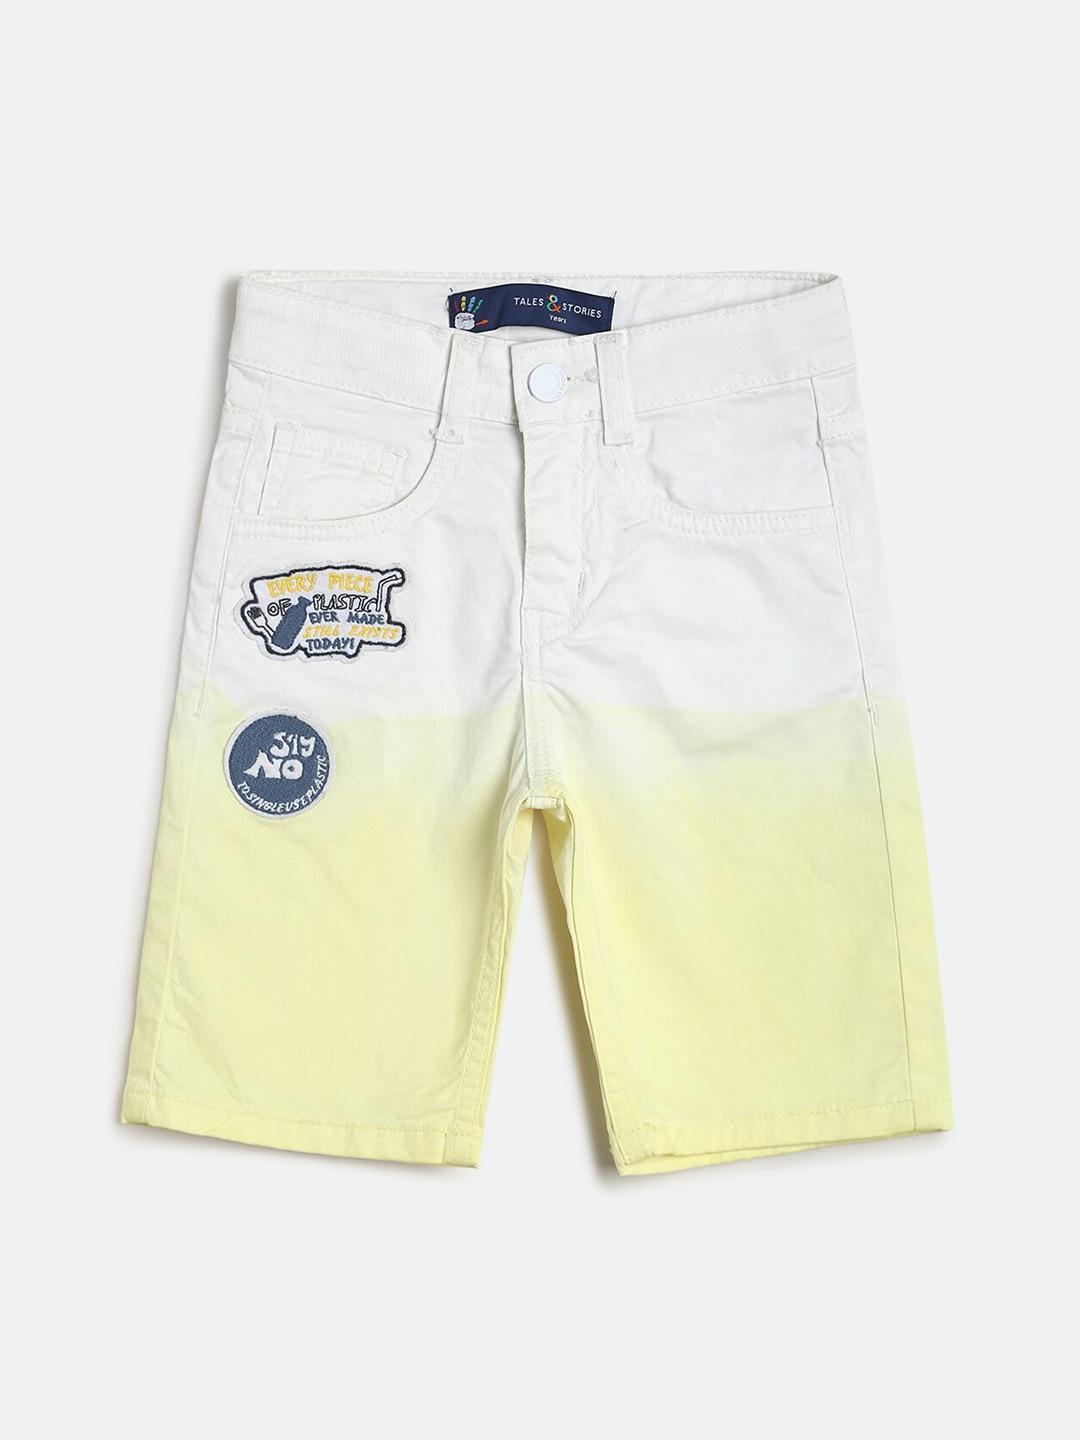 tales-&-stories-boys-yellow-embroidered-regular-shorts